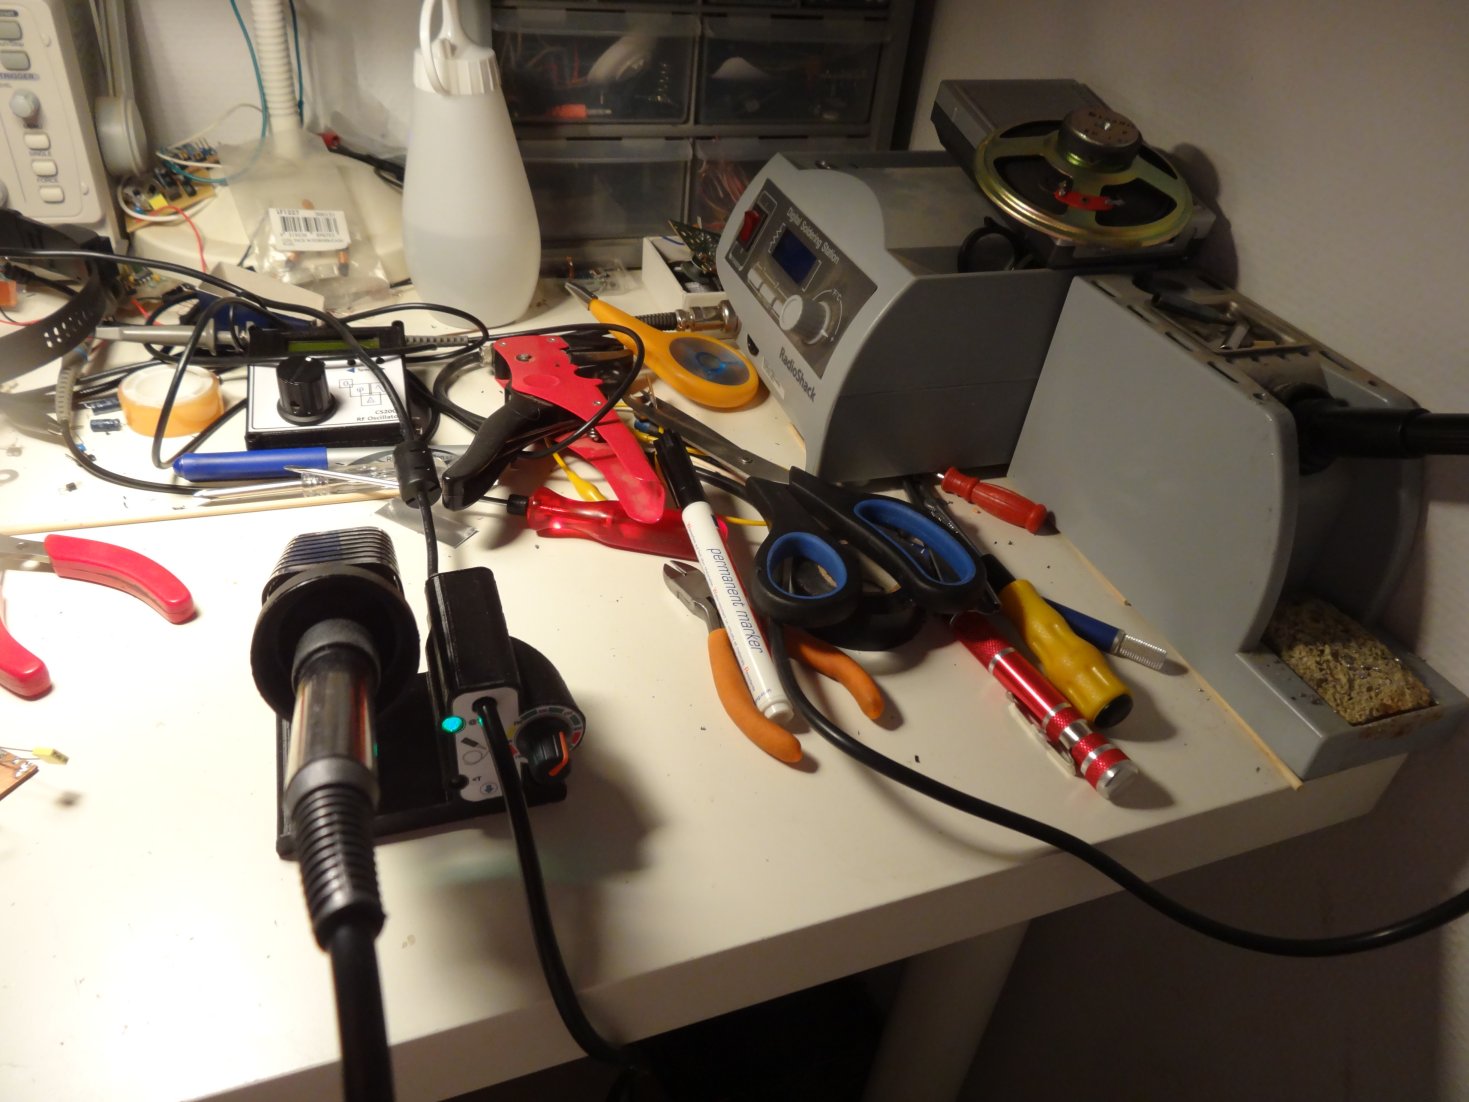 Compact soldering station operating